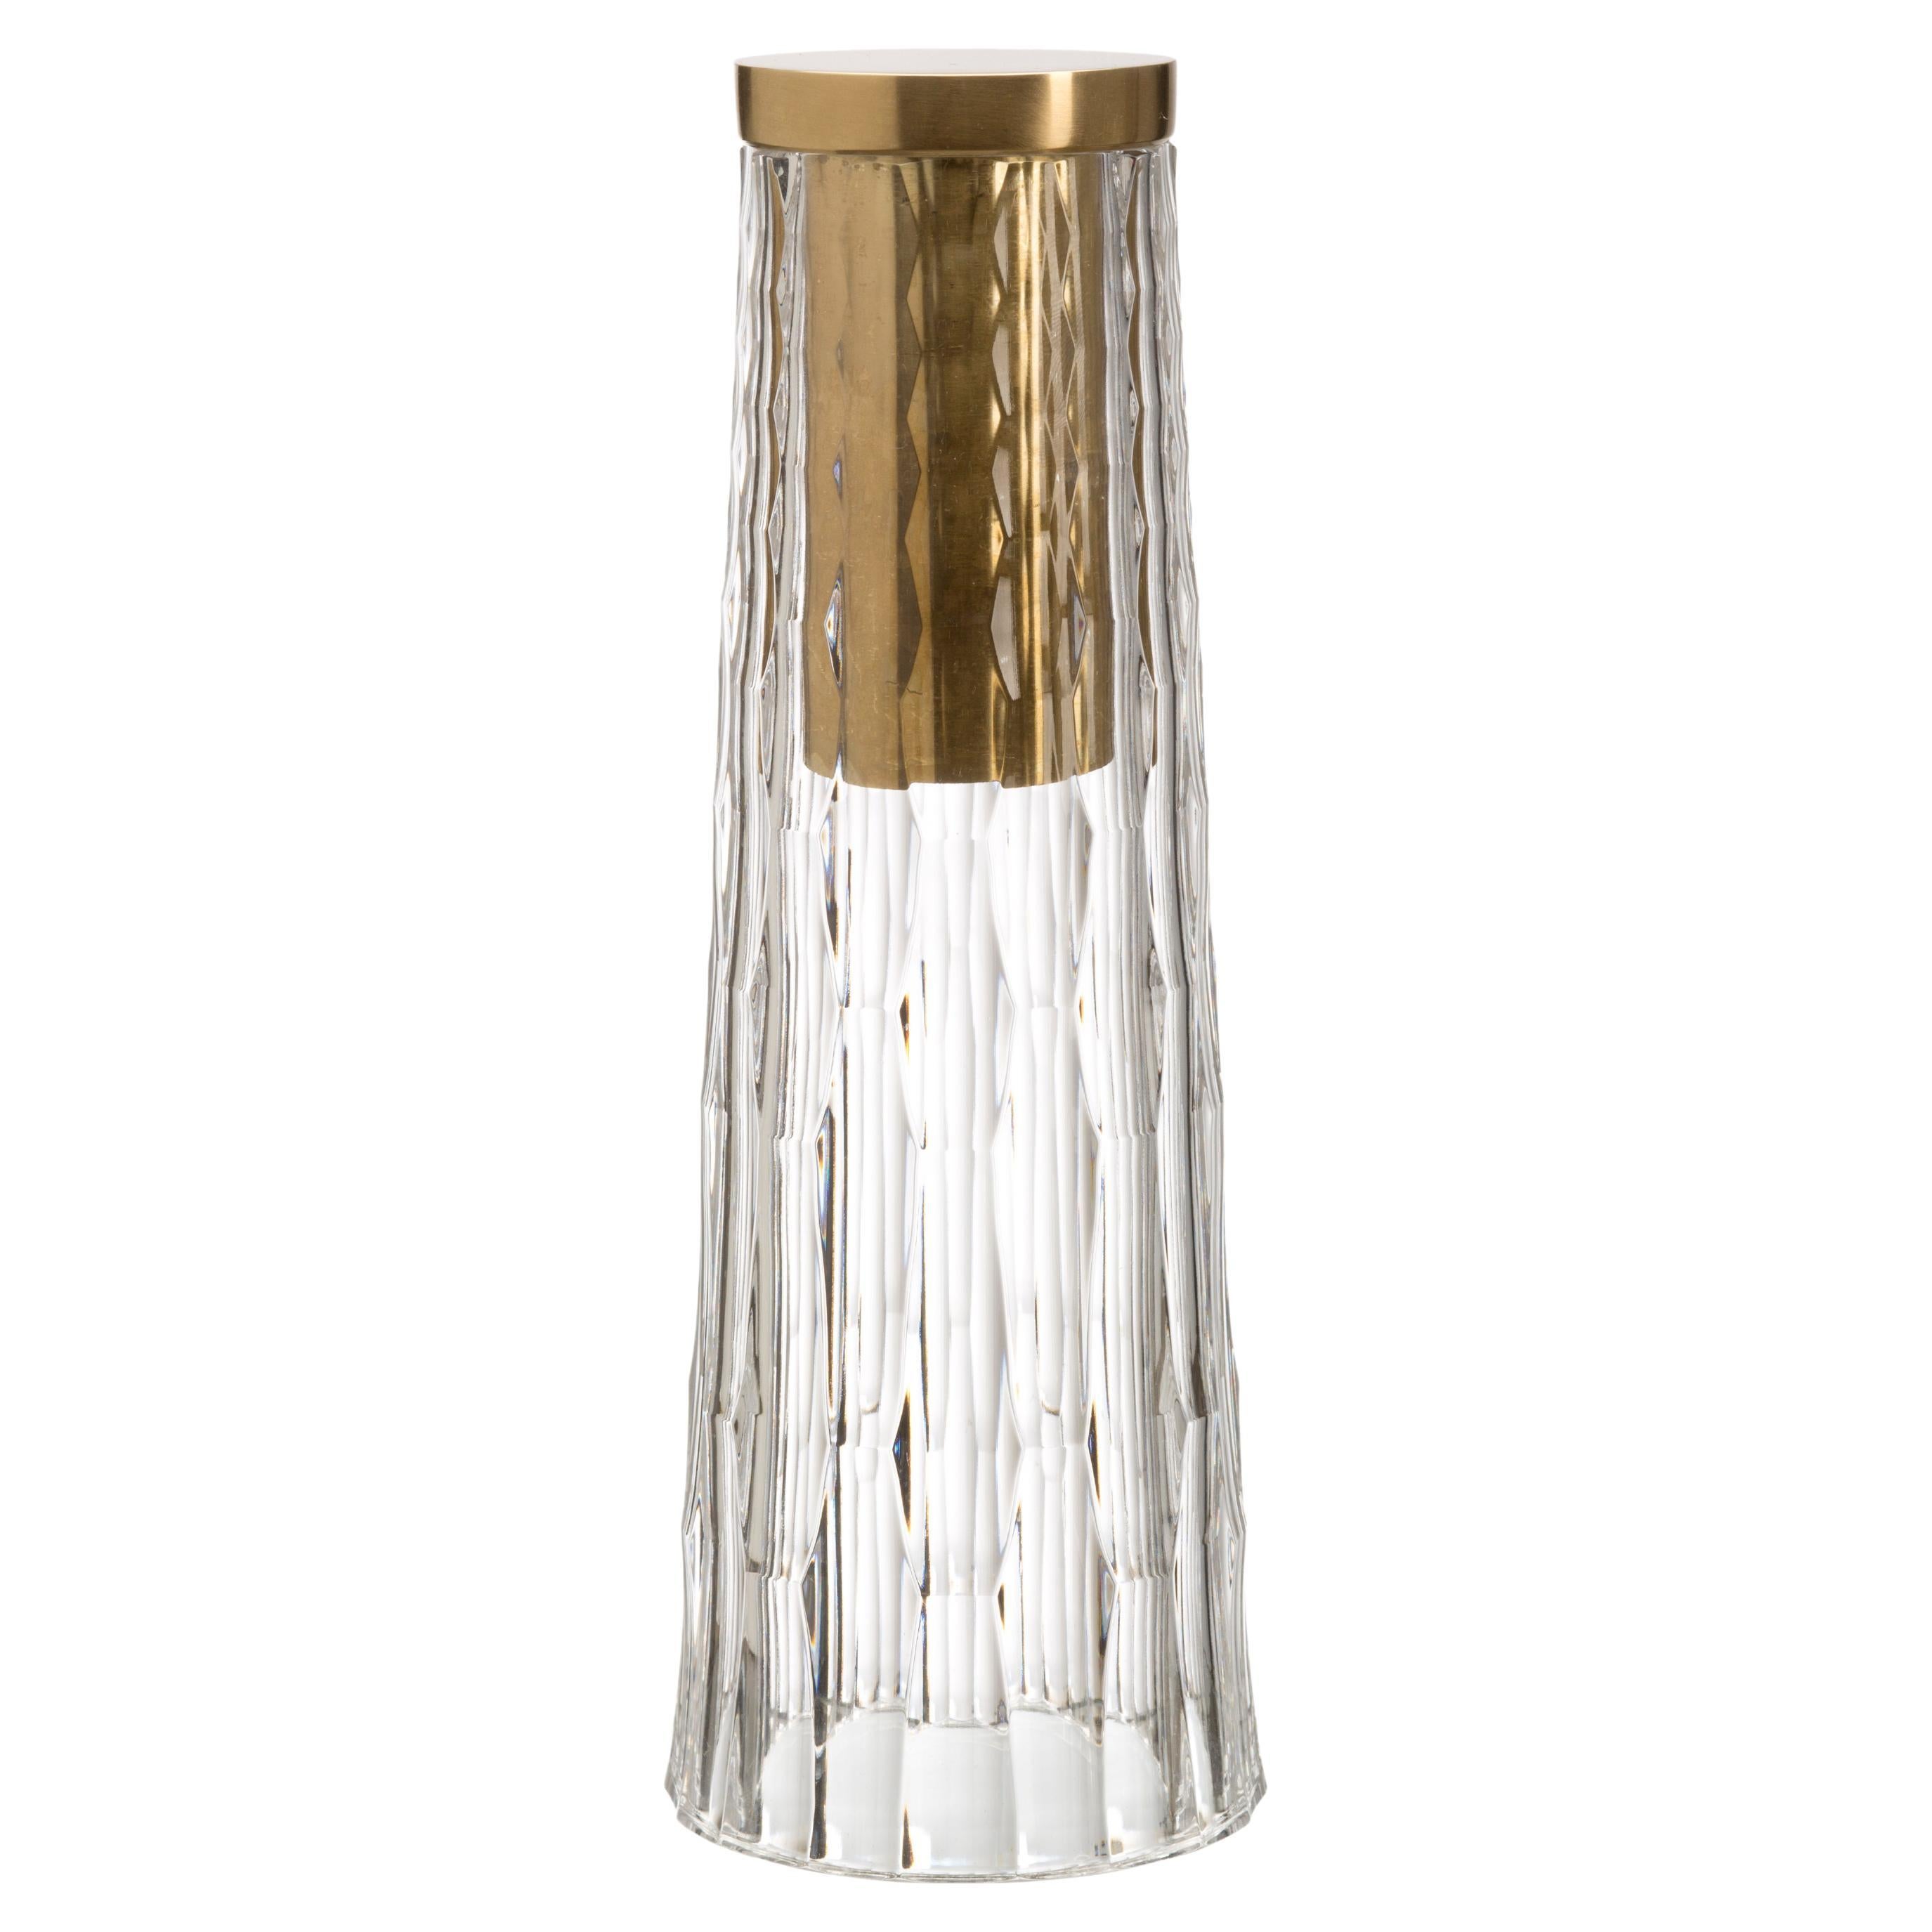 Art Deco Crystal Glass & Brass Cordless Table Lamp For Sale